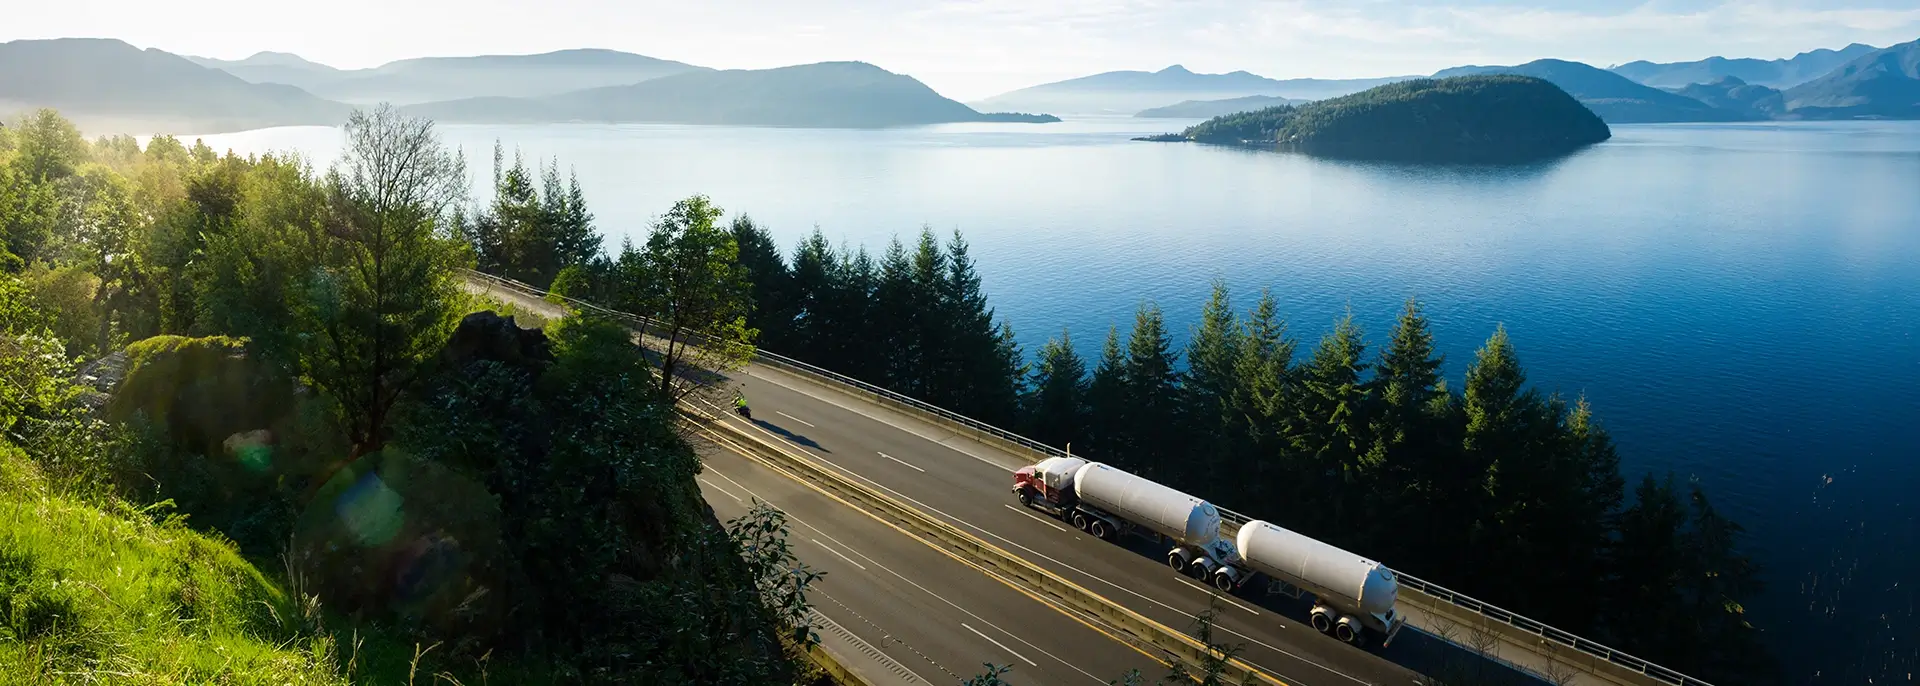 Downward view of tanker truck driving down a road near pine trees and water